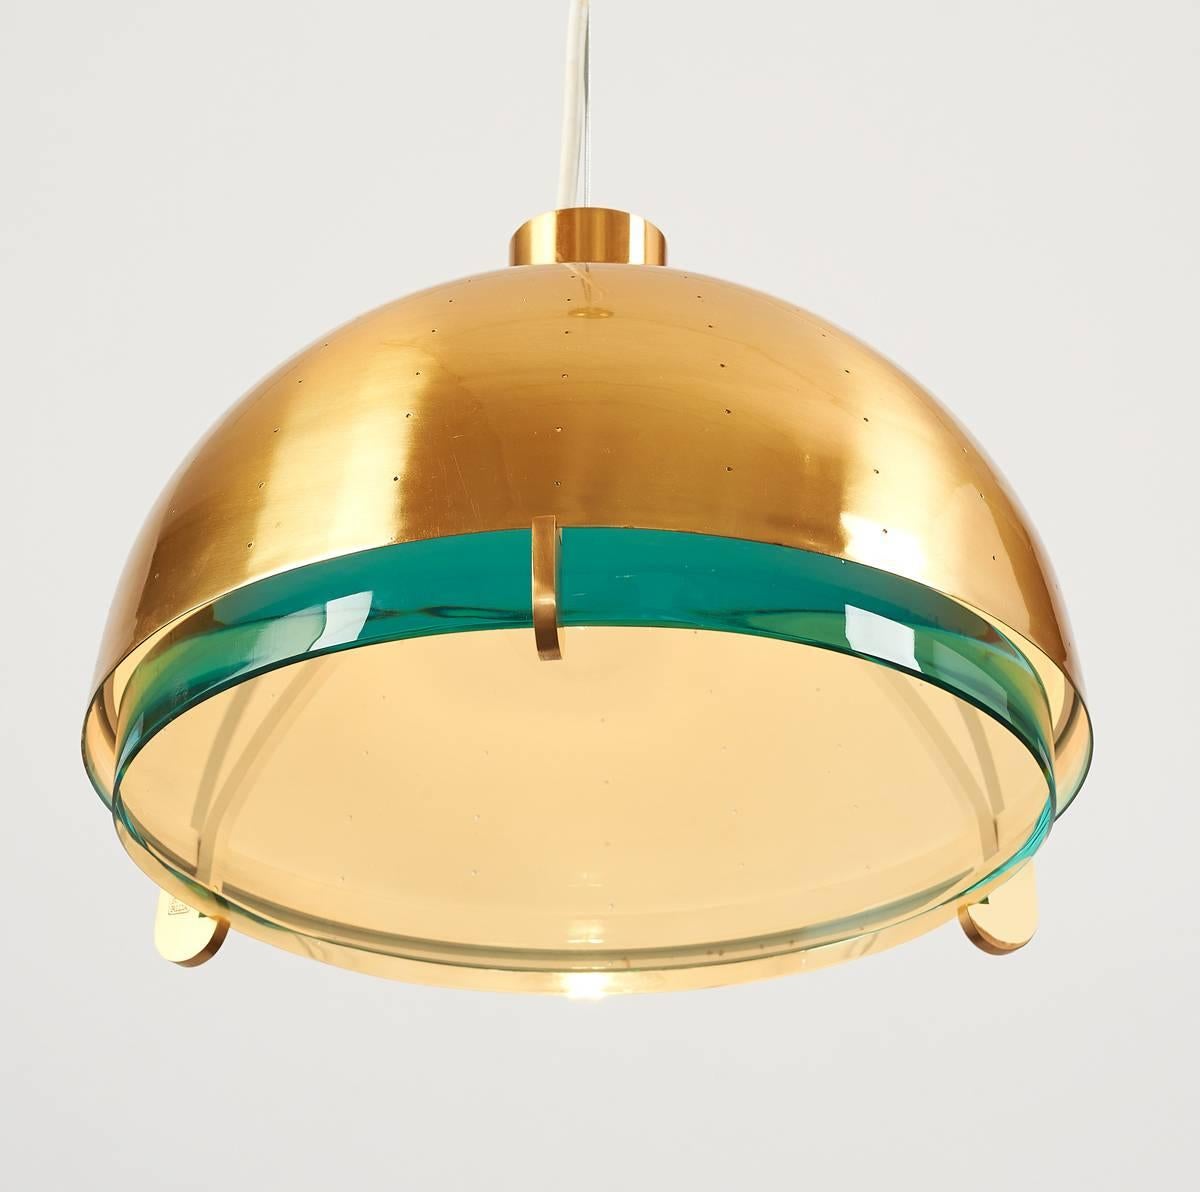 Italian Limited Edition Glass and Perforated Brass Lantern by Roberto Rida